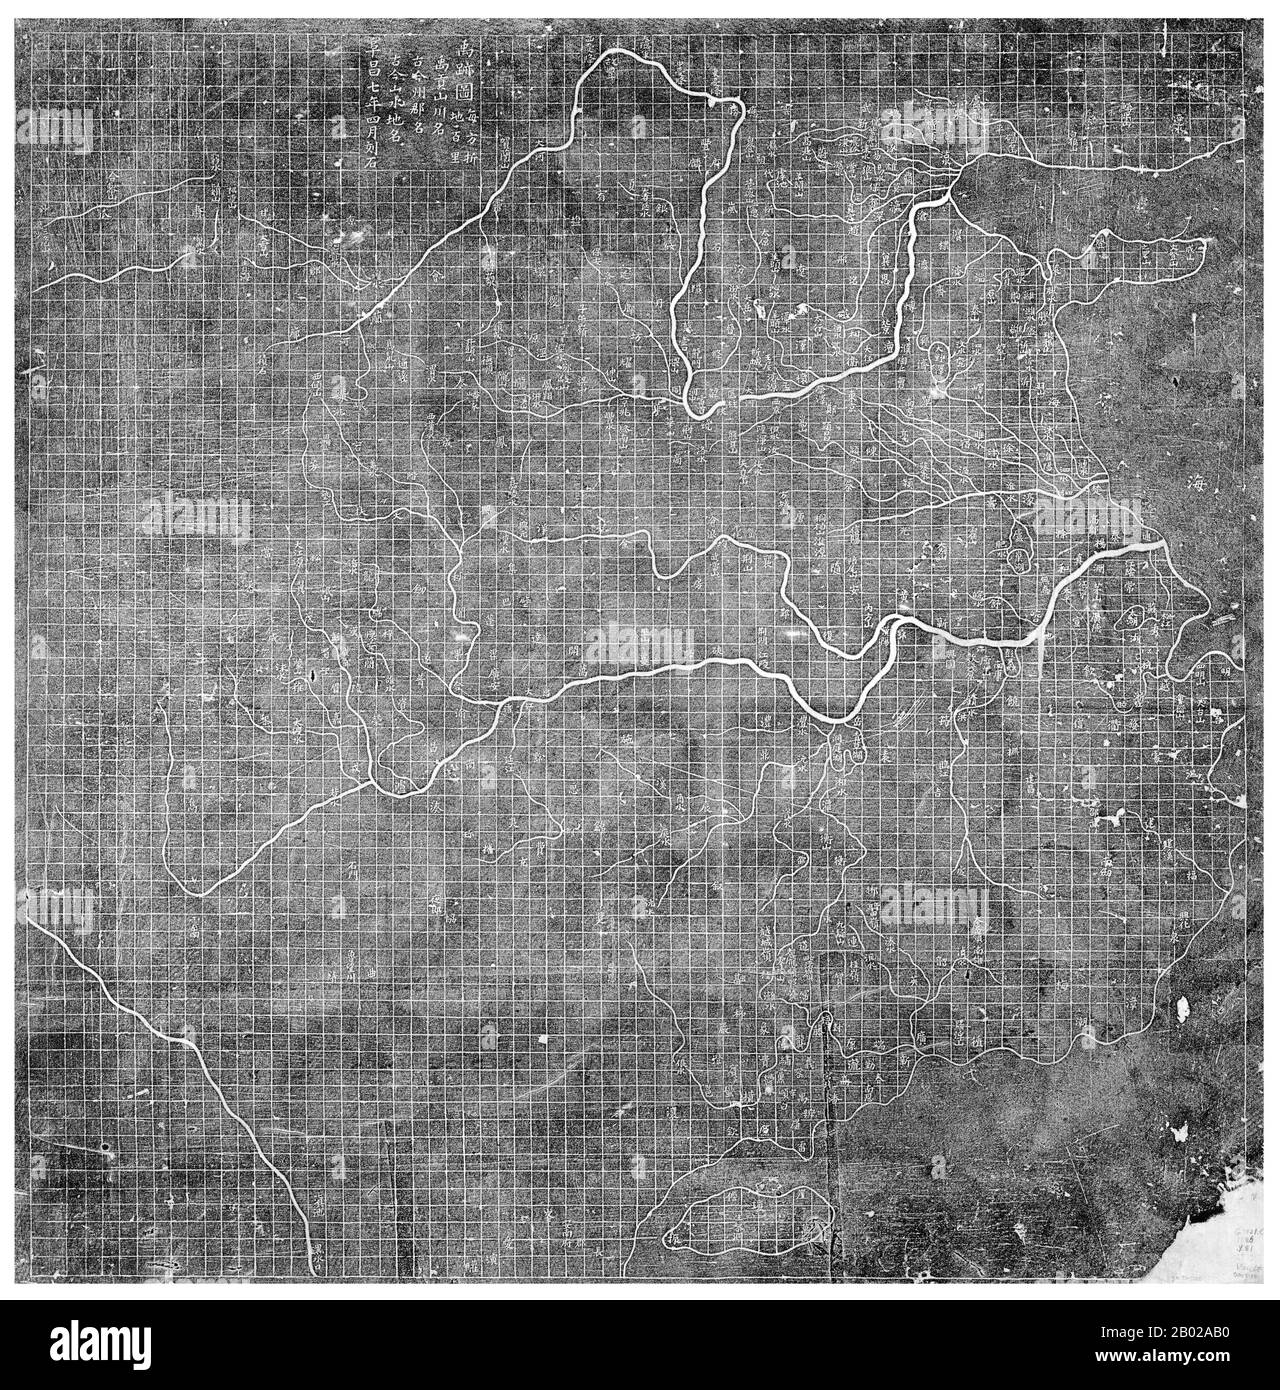 The Yu Ji Tu or 'Map of the Tracks of Yu', carved into stone in 1137, is located in the Stele Forest of Beilin Museum at Xi'an.  The 3 ft (0.91 m) squared map features a grid of 100 li squares. China's coastline and river systems are clearly defined and precisely pinpointed on the map. 'Yu' refers to Yu Gong (Yu the Great), a Chinese deity described in the geographical chapter of the Classic of History, dated 5th century BCE. Stock Photo